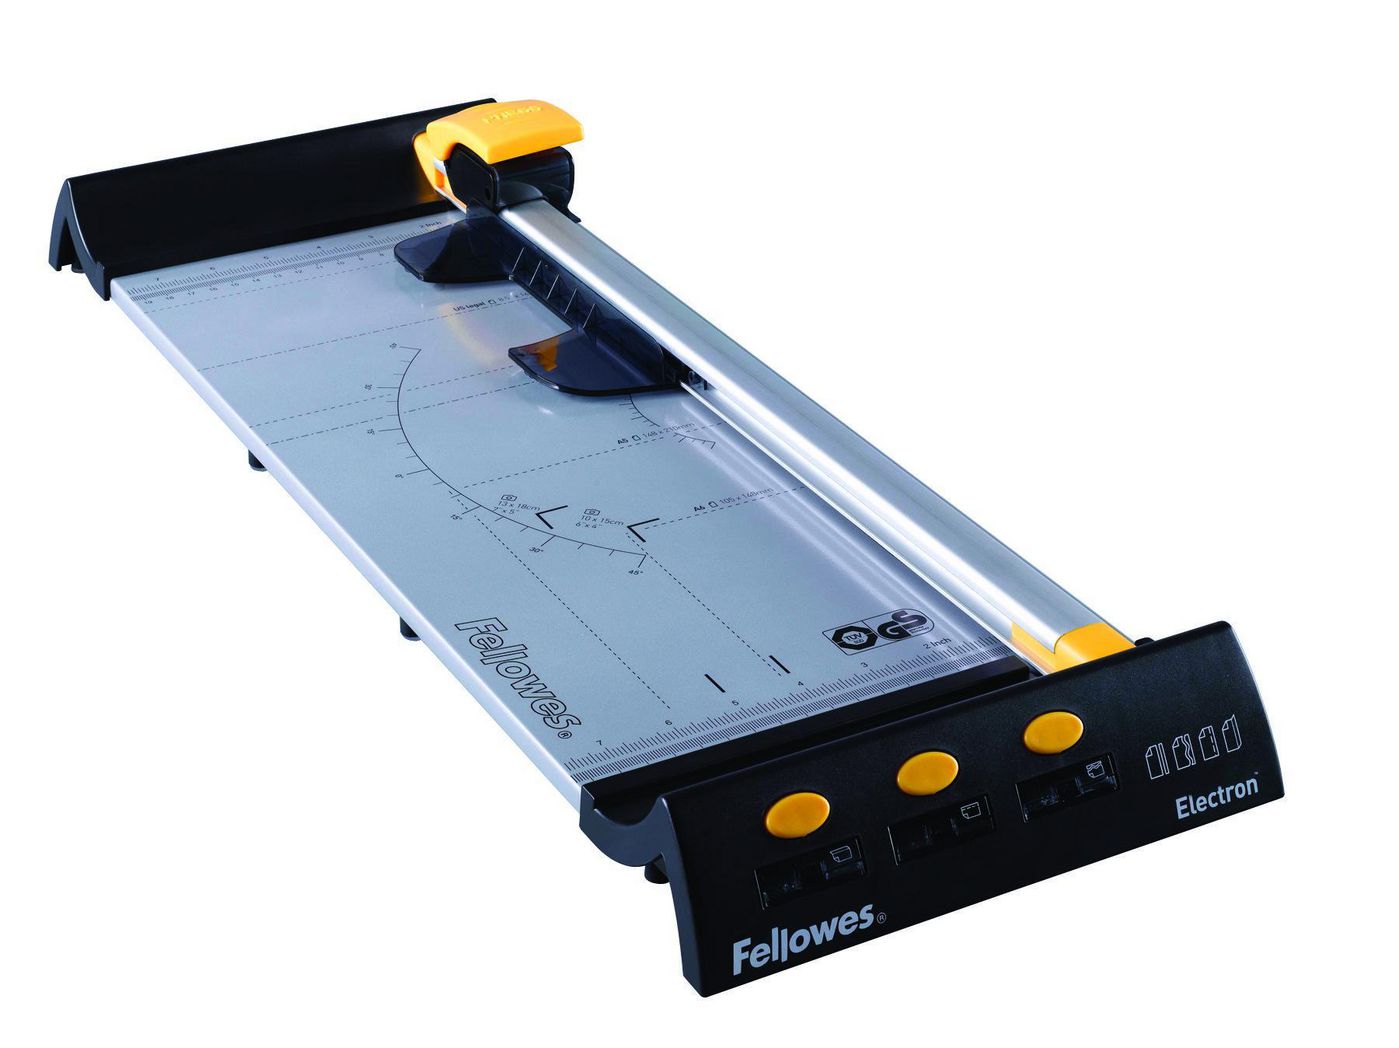 Fellowes 5410501 W128258724 Electron A3180 Paper Cutter 